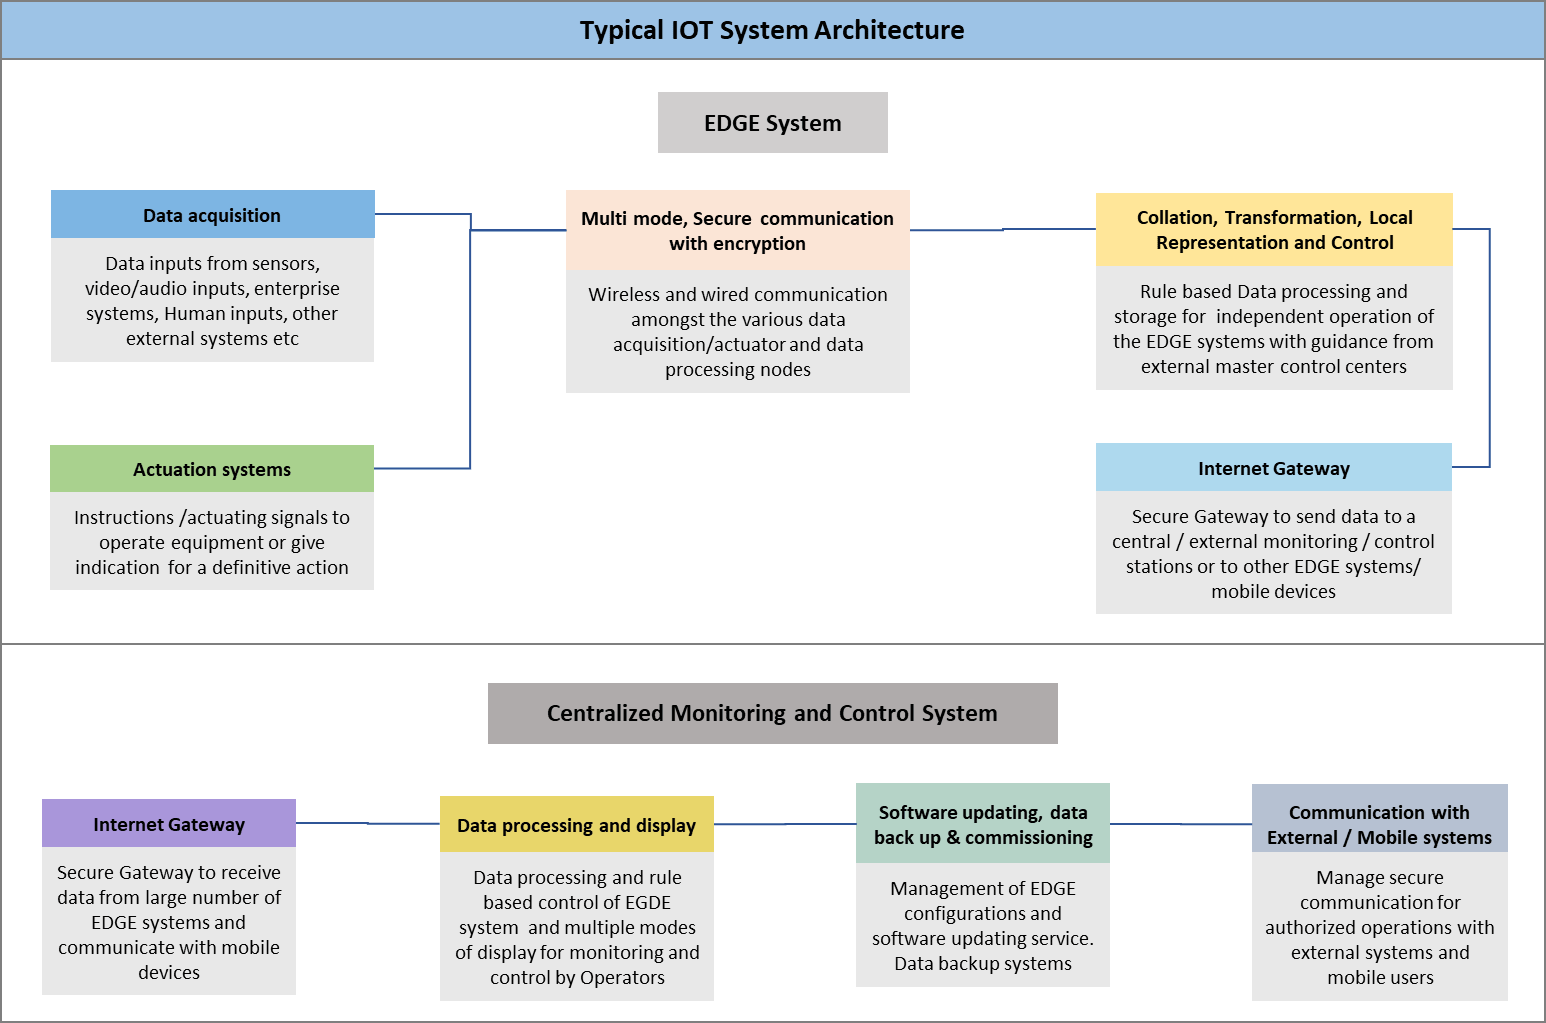 Typical IoT System Architecture